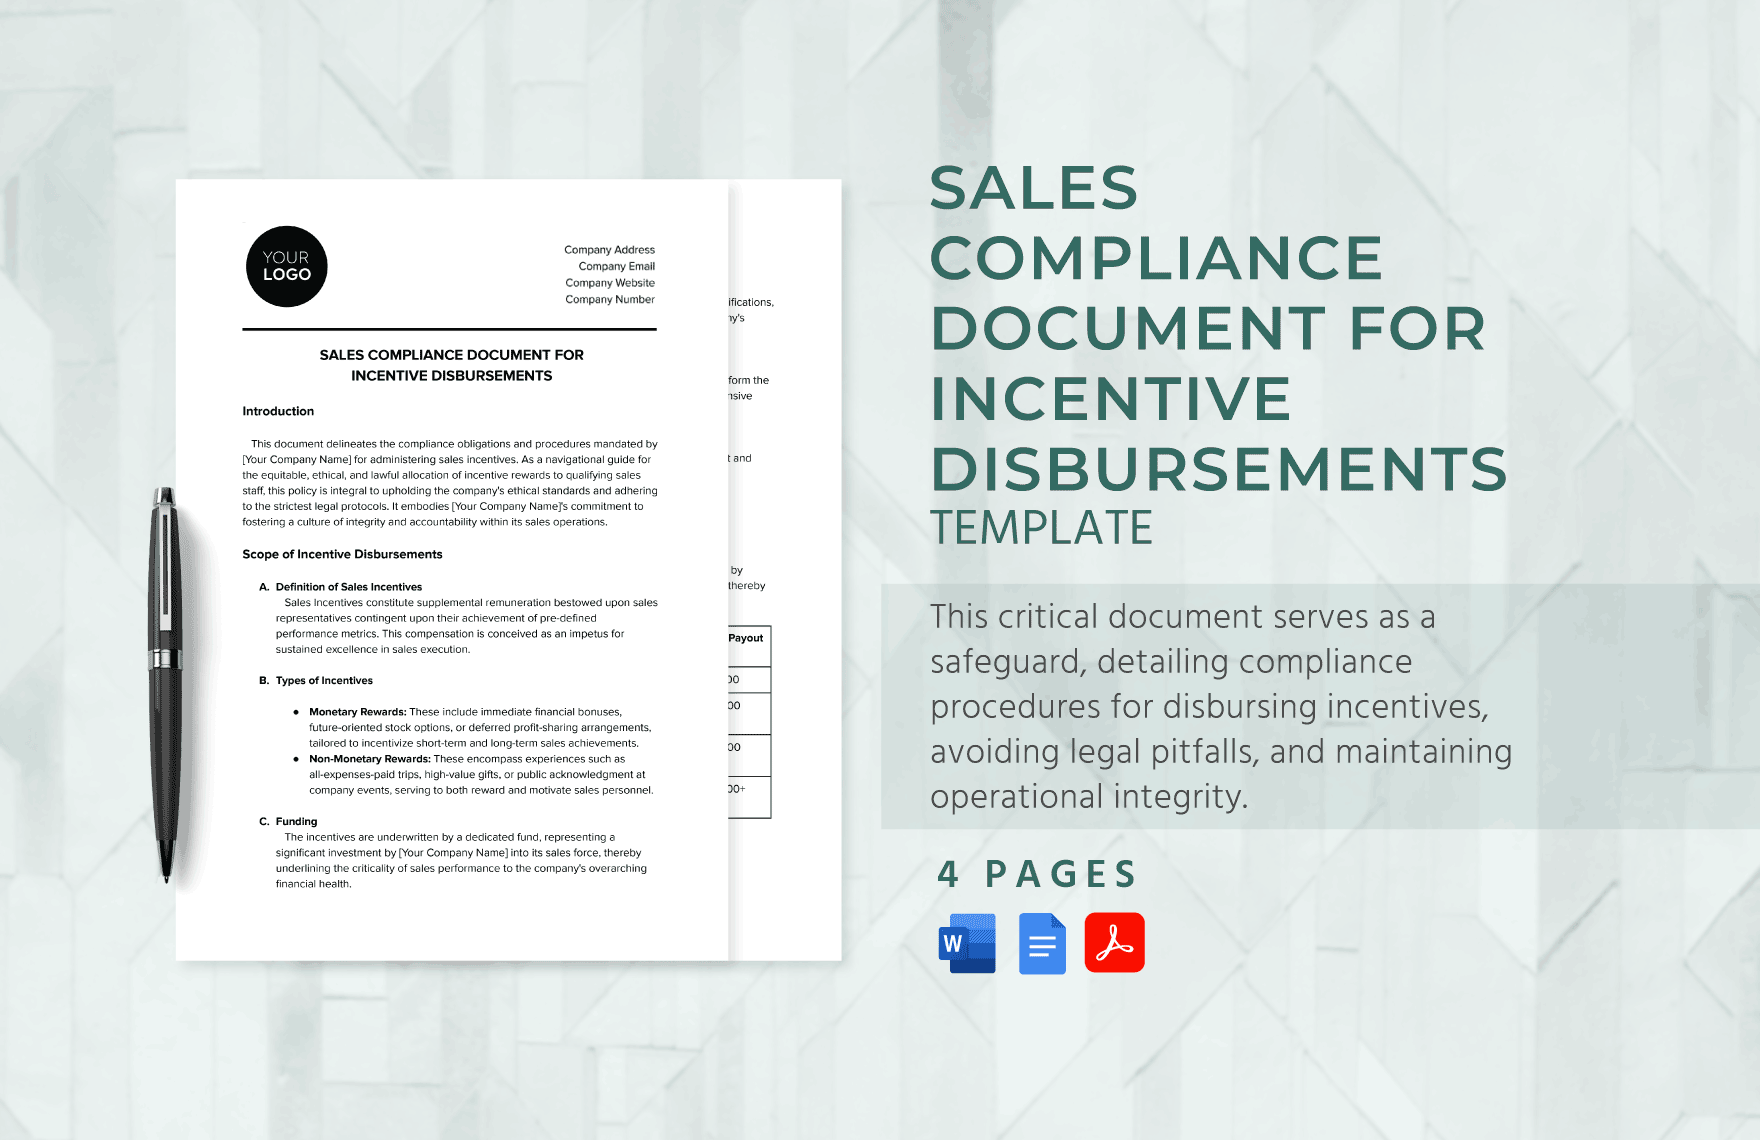 Sales Compliance Document for Incentive Disbursements Template in Word, Google Docs, PDF